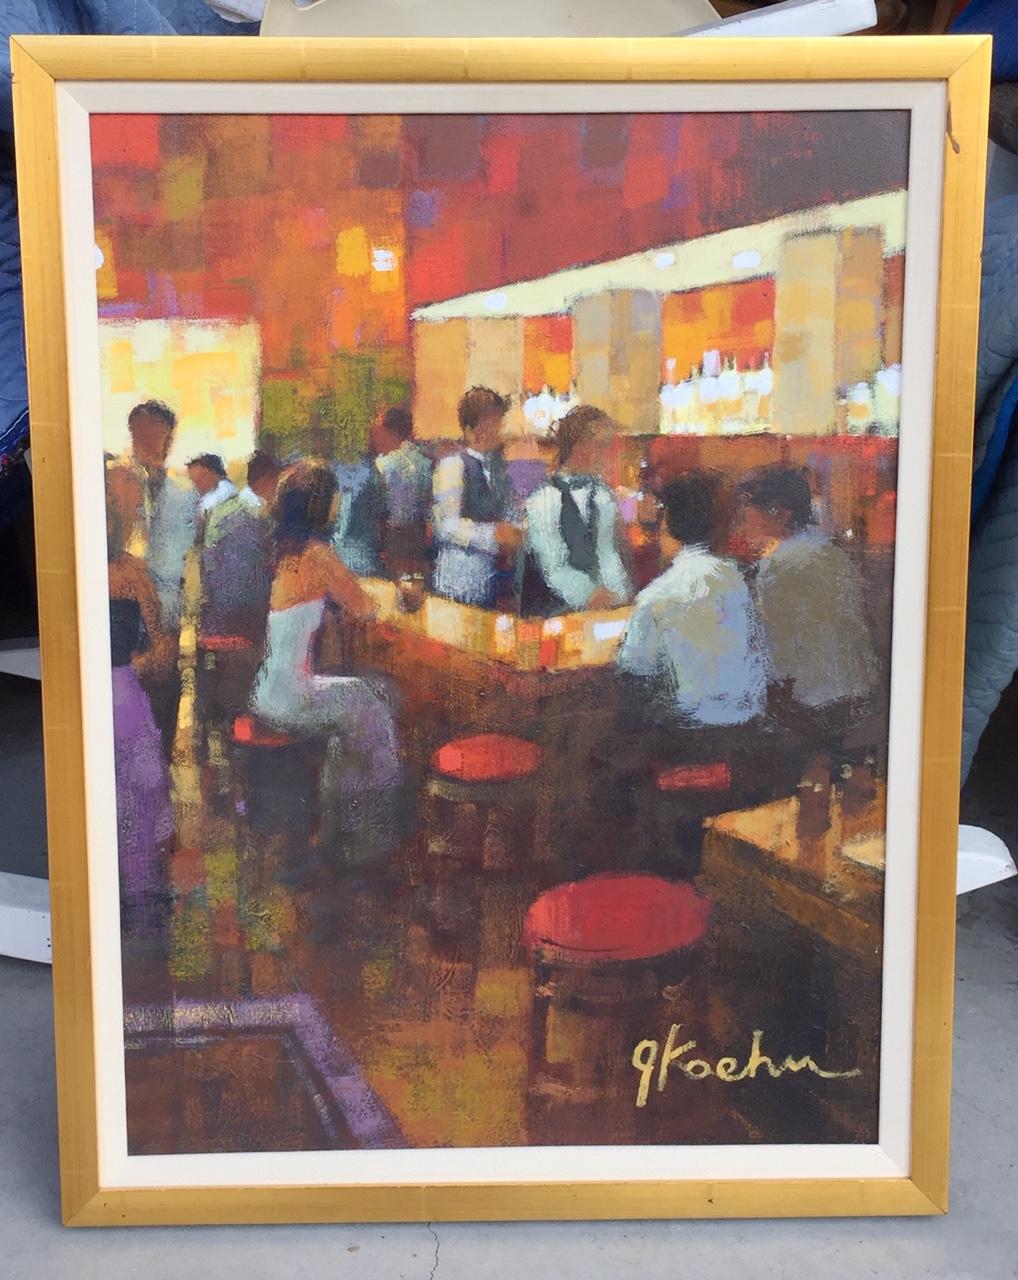 Original oil “bar scene” piece by American artist Jeff Koehn. Talented artist with formal art education from the Art Institute of Colorado with works in galleries thru the United States. Particular to this painting in style, the artist uses an